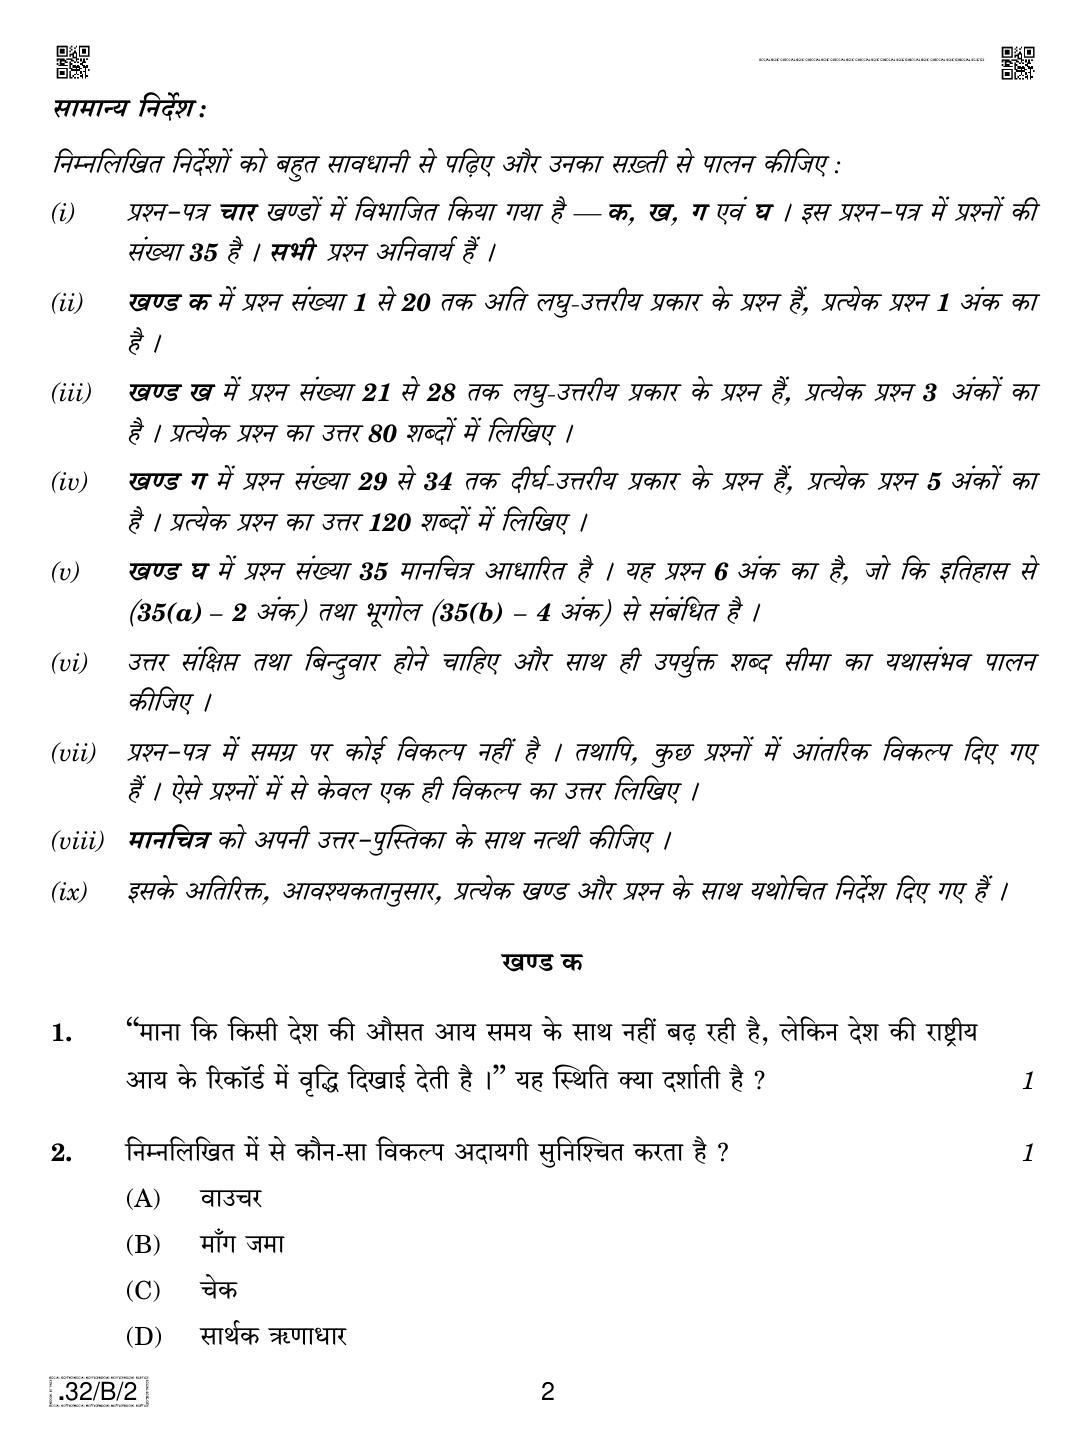 CBSE Class 10 32-C-2 Social Science 2020 Compartment Question Paper - Page 2